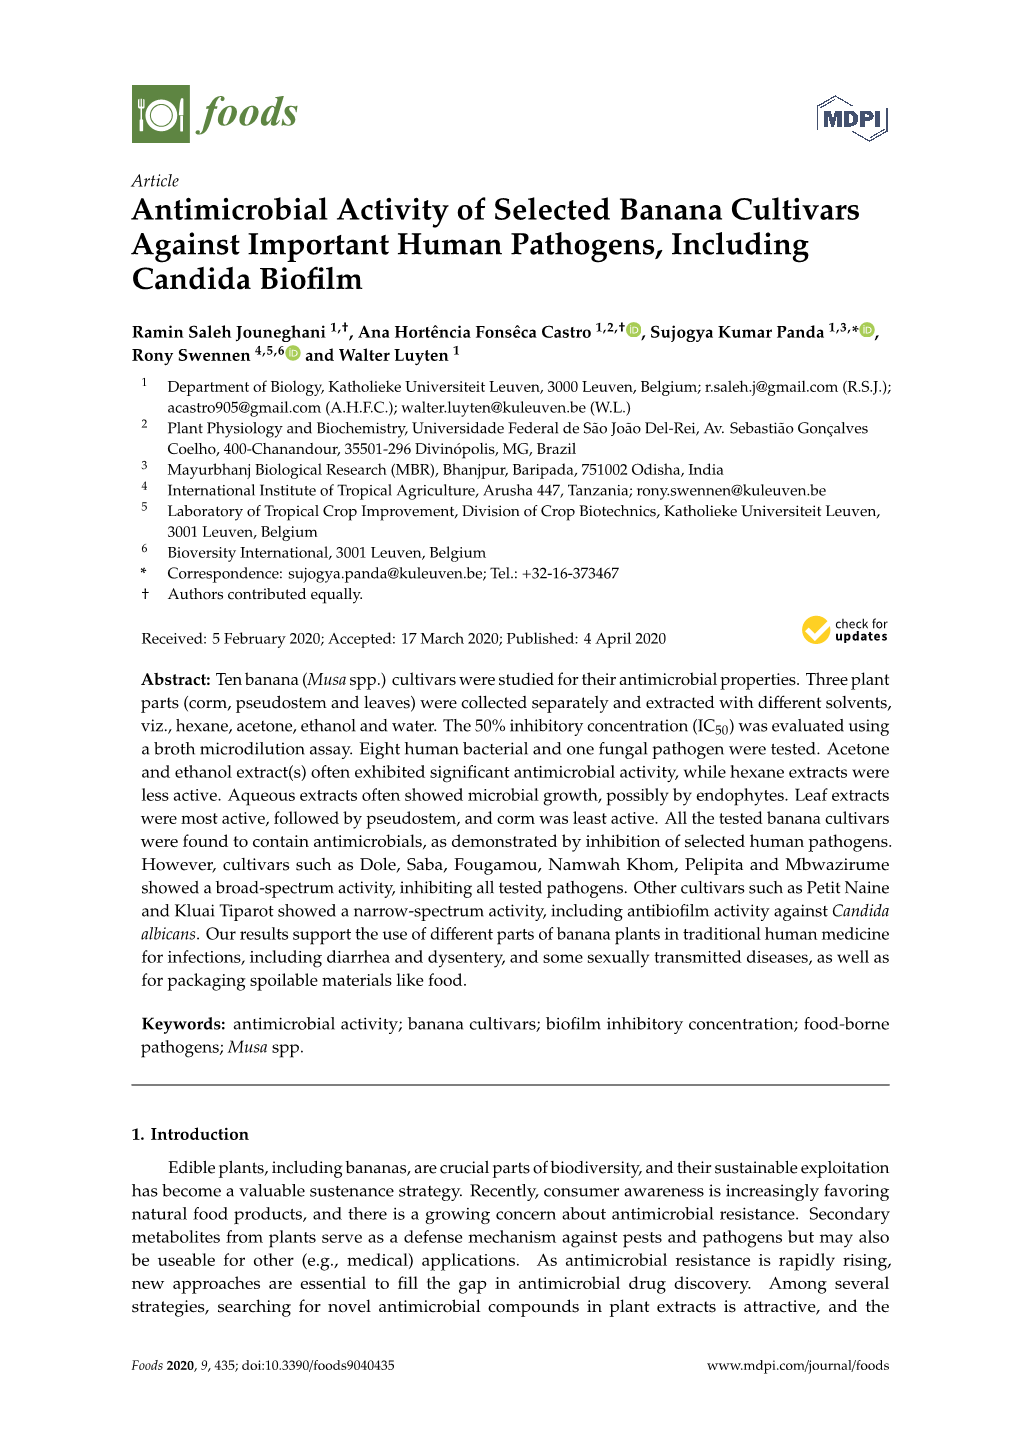 Antimicrobial Activity of Selected Banana Cultivars Against Important Human Pathogens, Including Candida Bioﬁlm